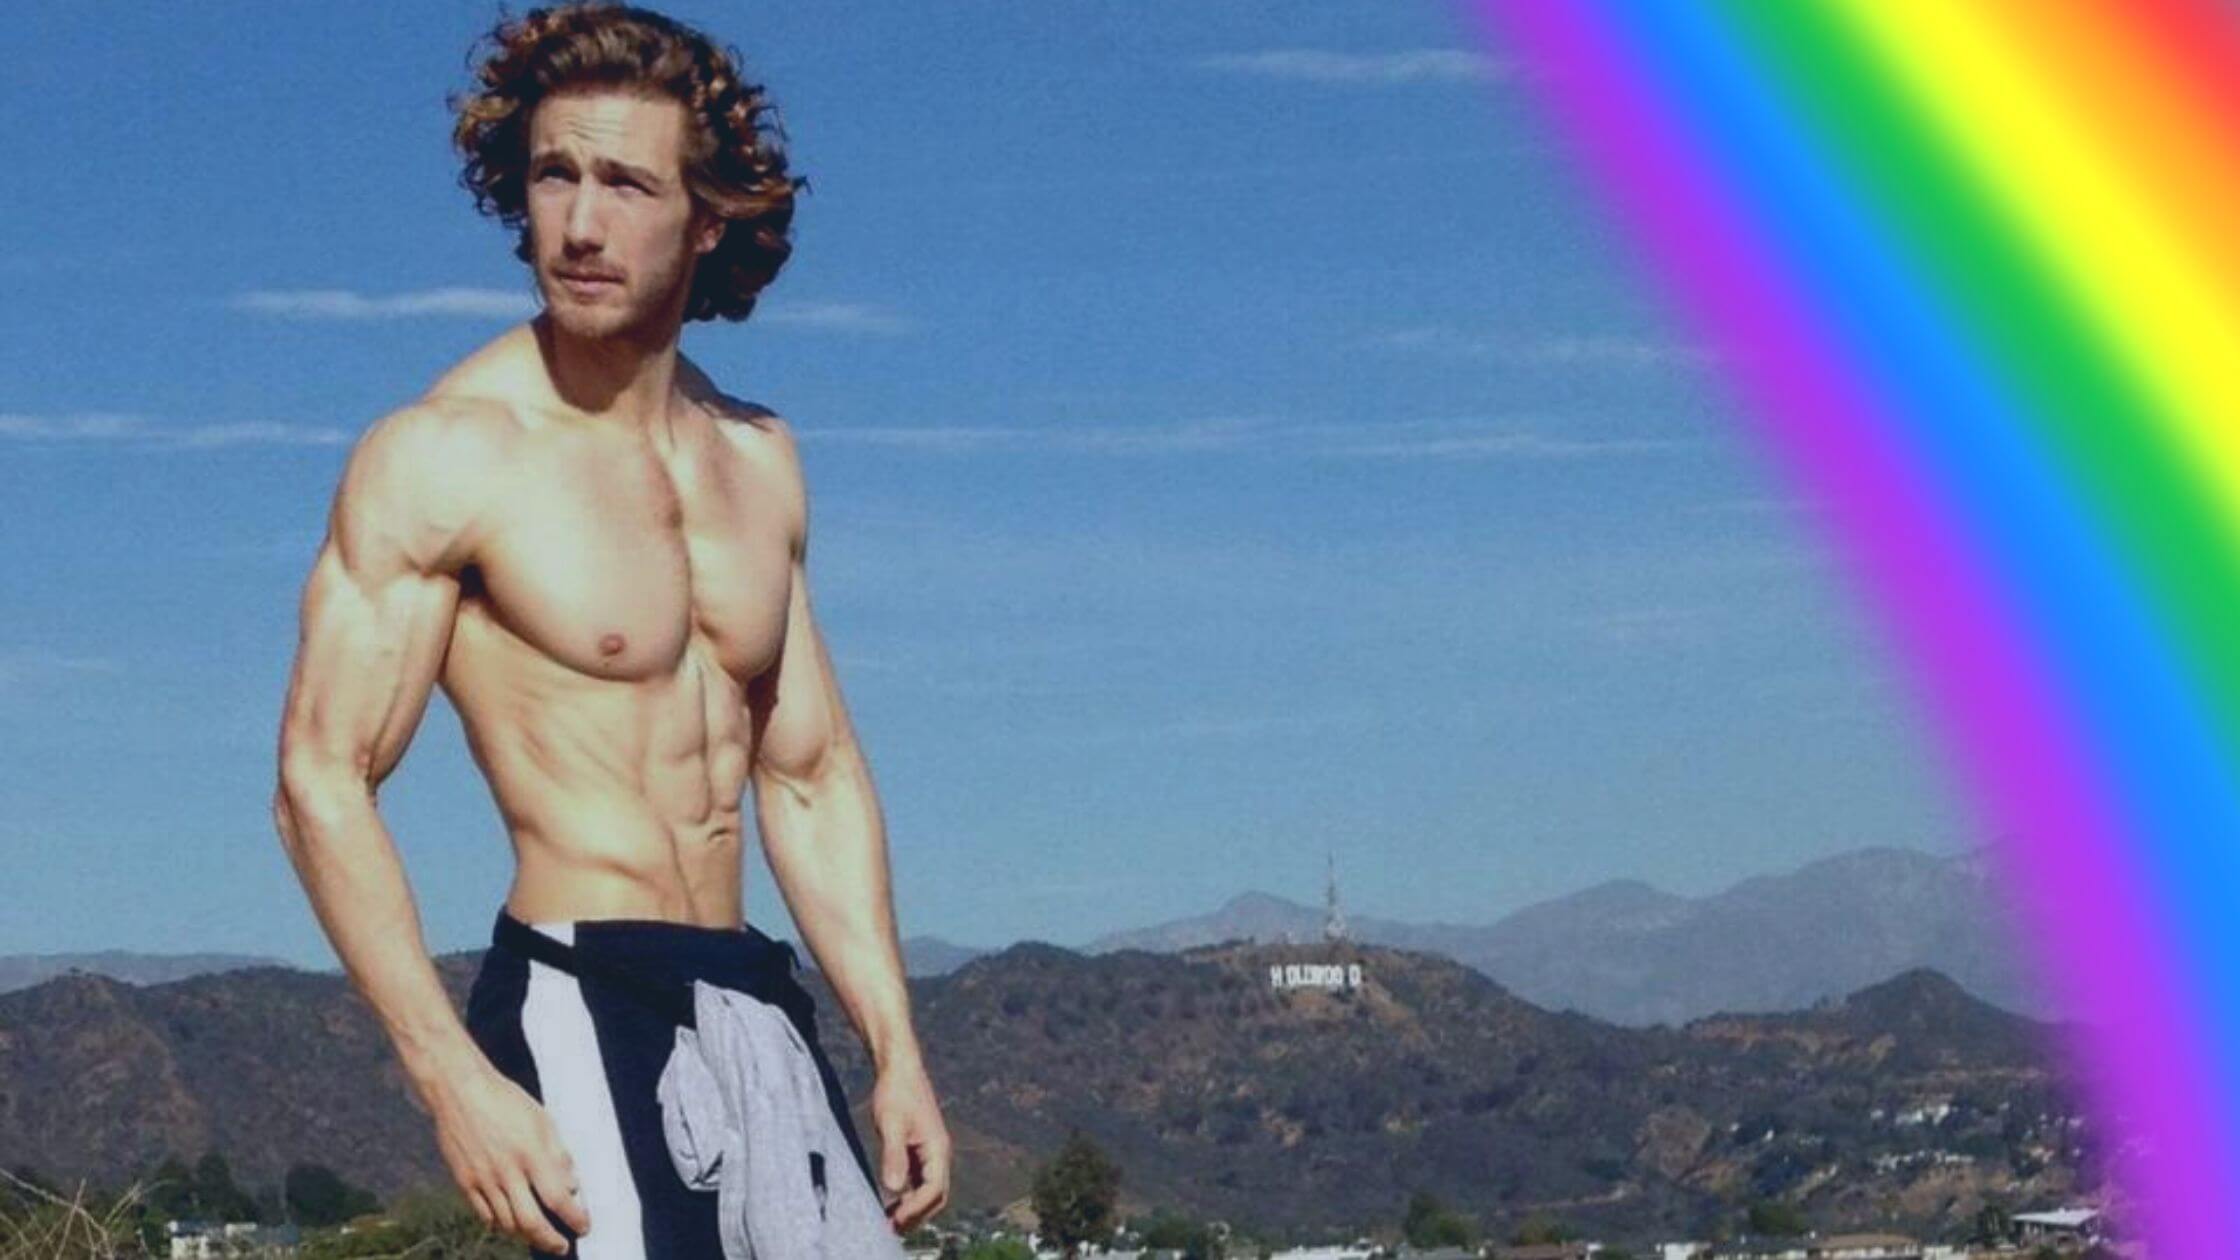 Is eugenio siller gay